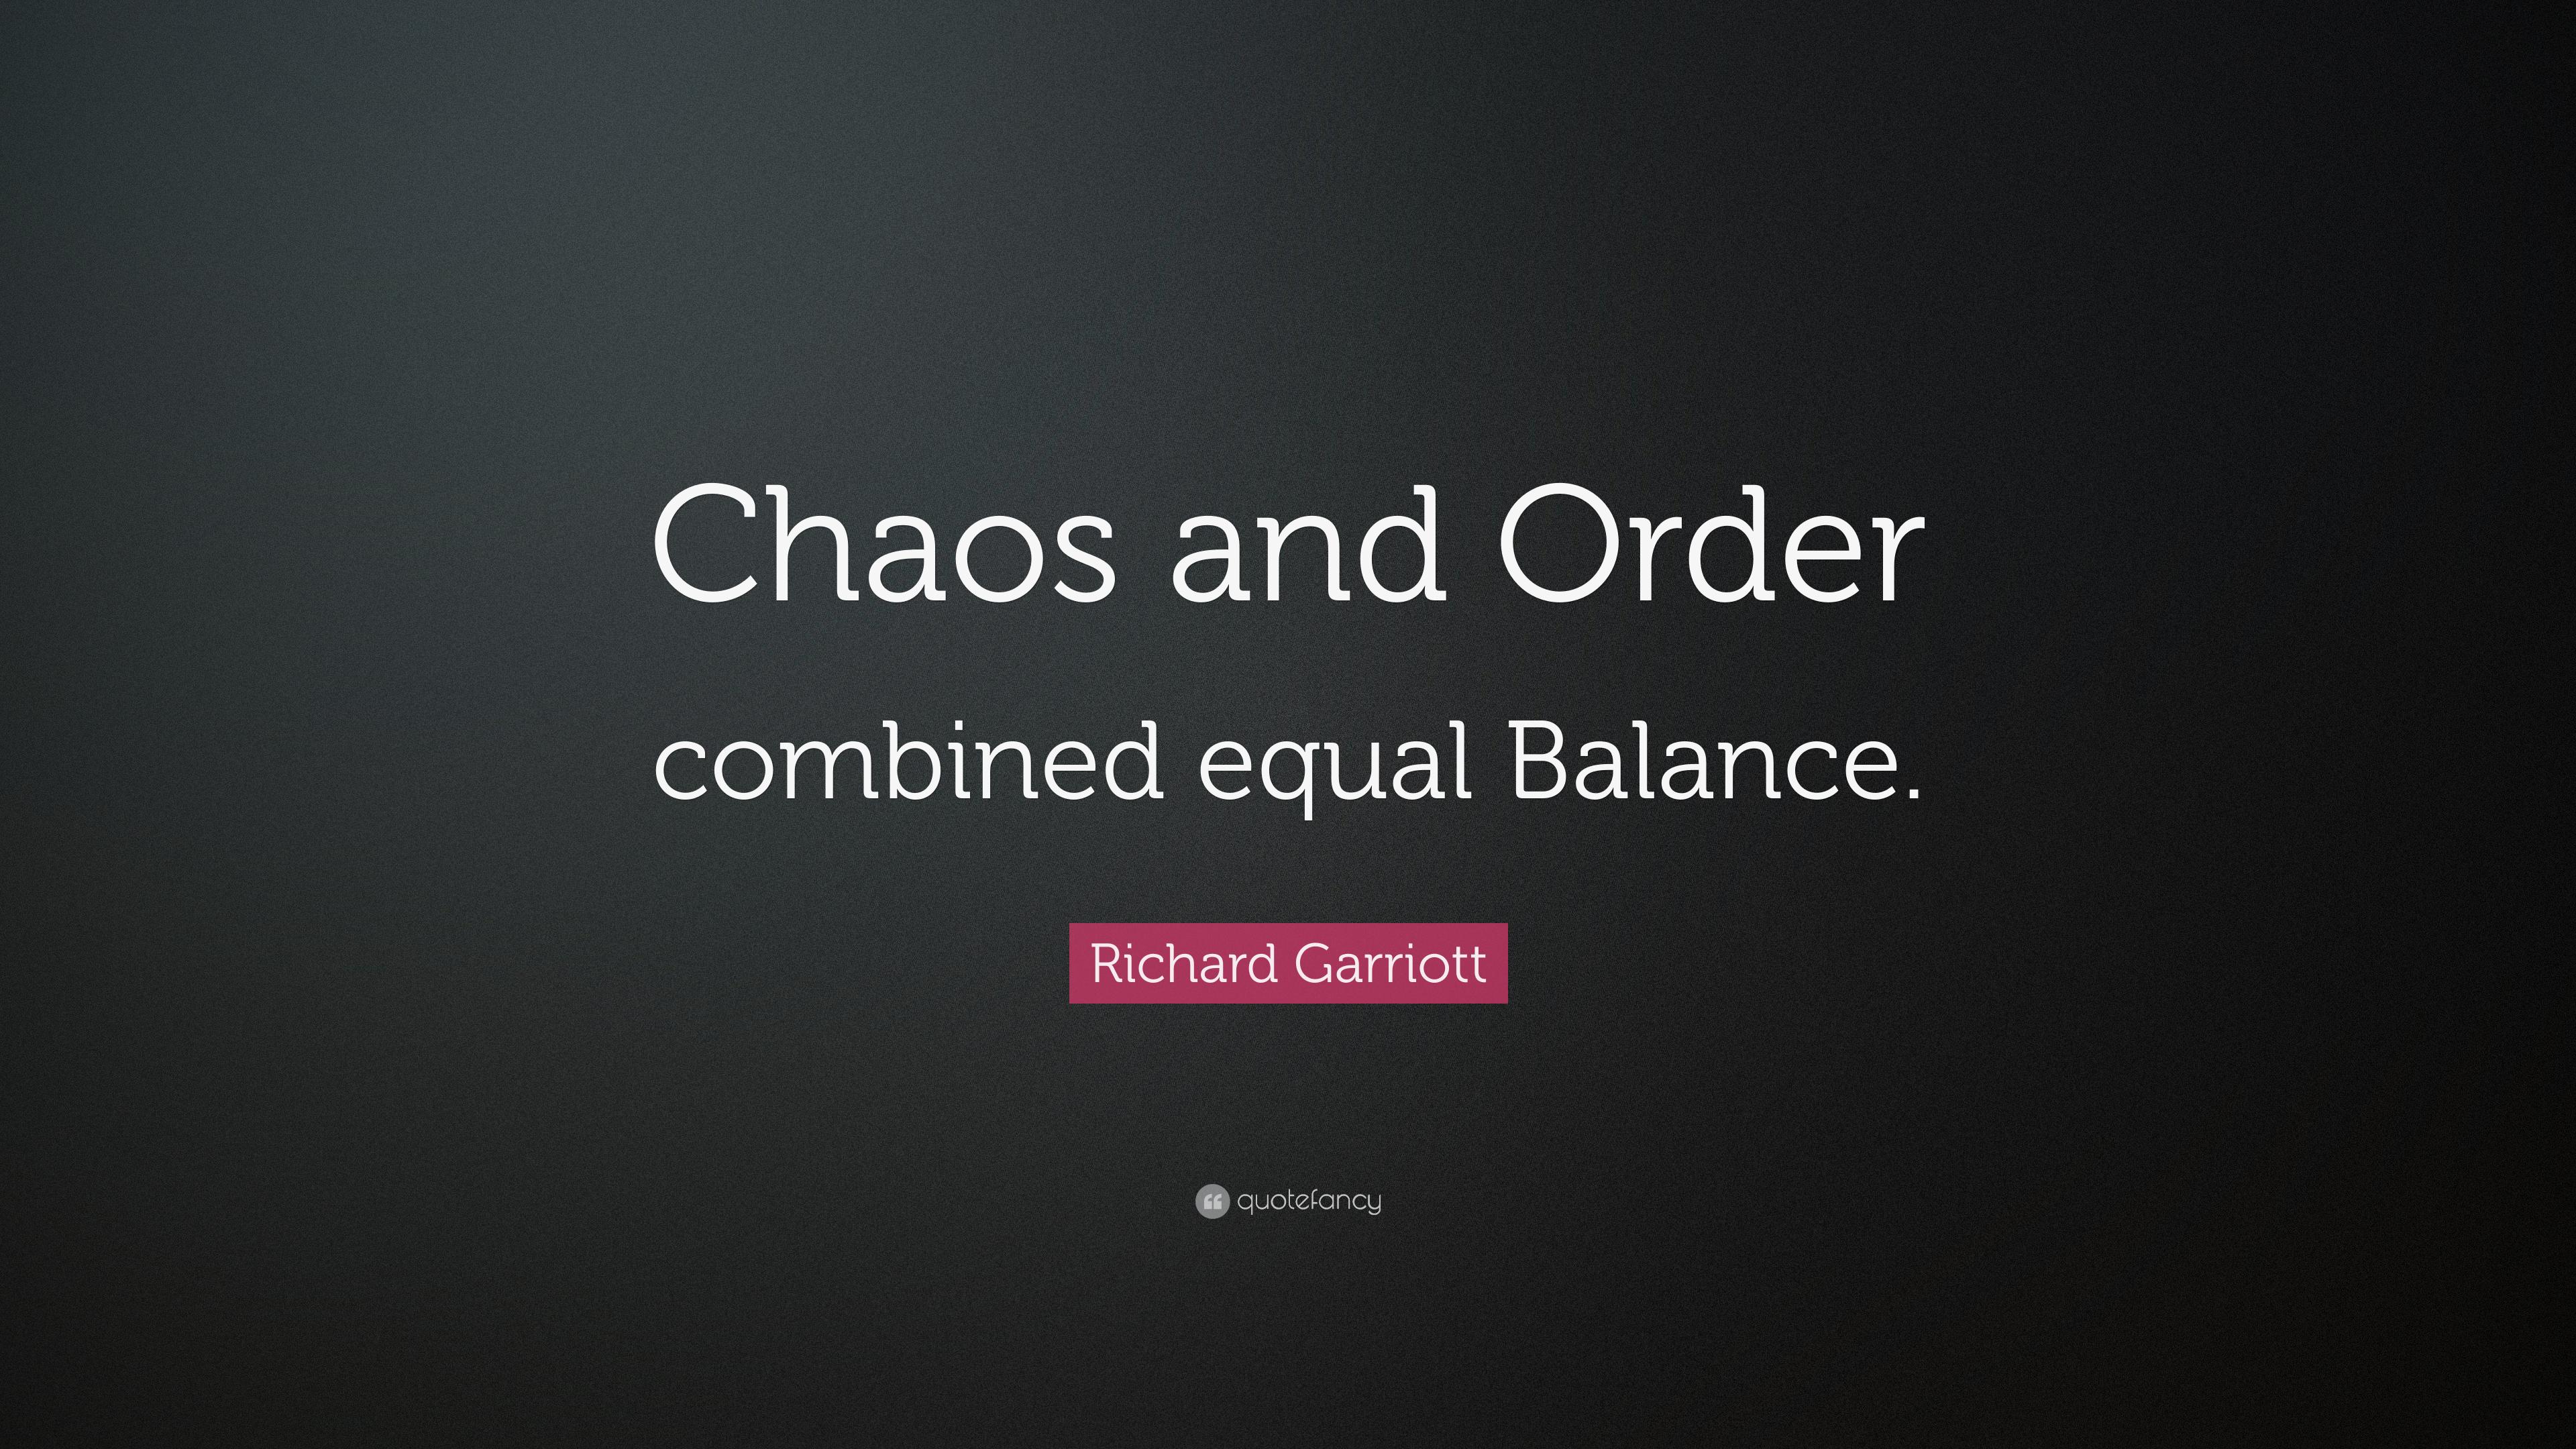 Richard Garriott Quote: “Chaos and Order combined equal Balance.” 7